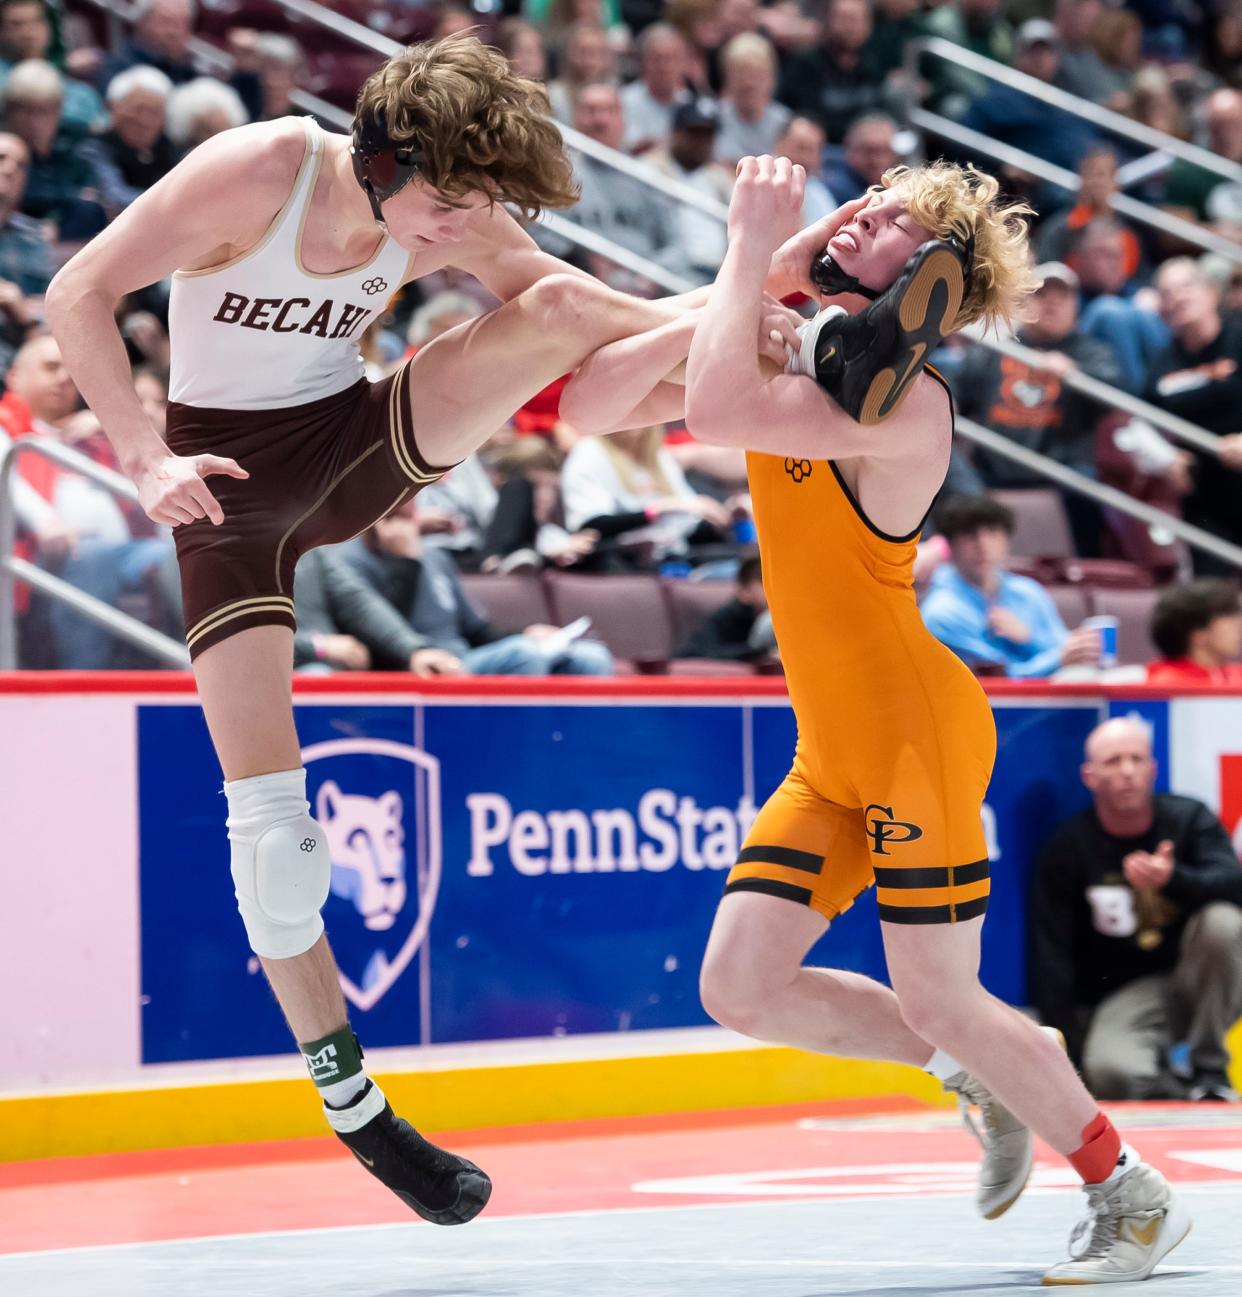 Cathedral Prep's Jake Van Dee, right, wrestles Bethlehem Catholic's Dante Frinzi during a 126-pound round of 16 bout at the PIAA Class 3A Wrestling Championships at the Giant Center on Thursday, March 10, 2022, in Derry Township. Van Dee won by decision, 2-1.